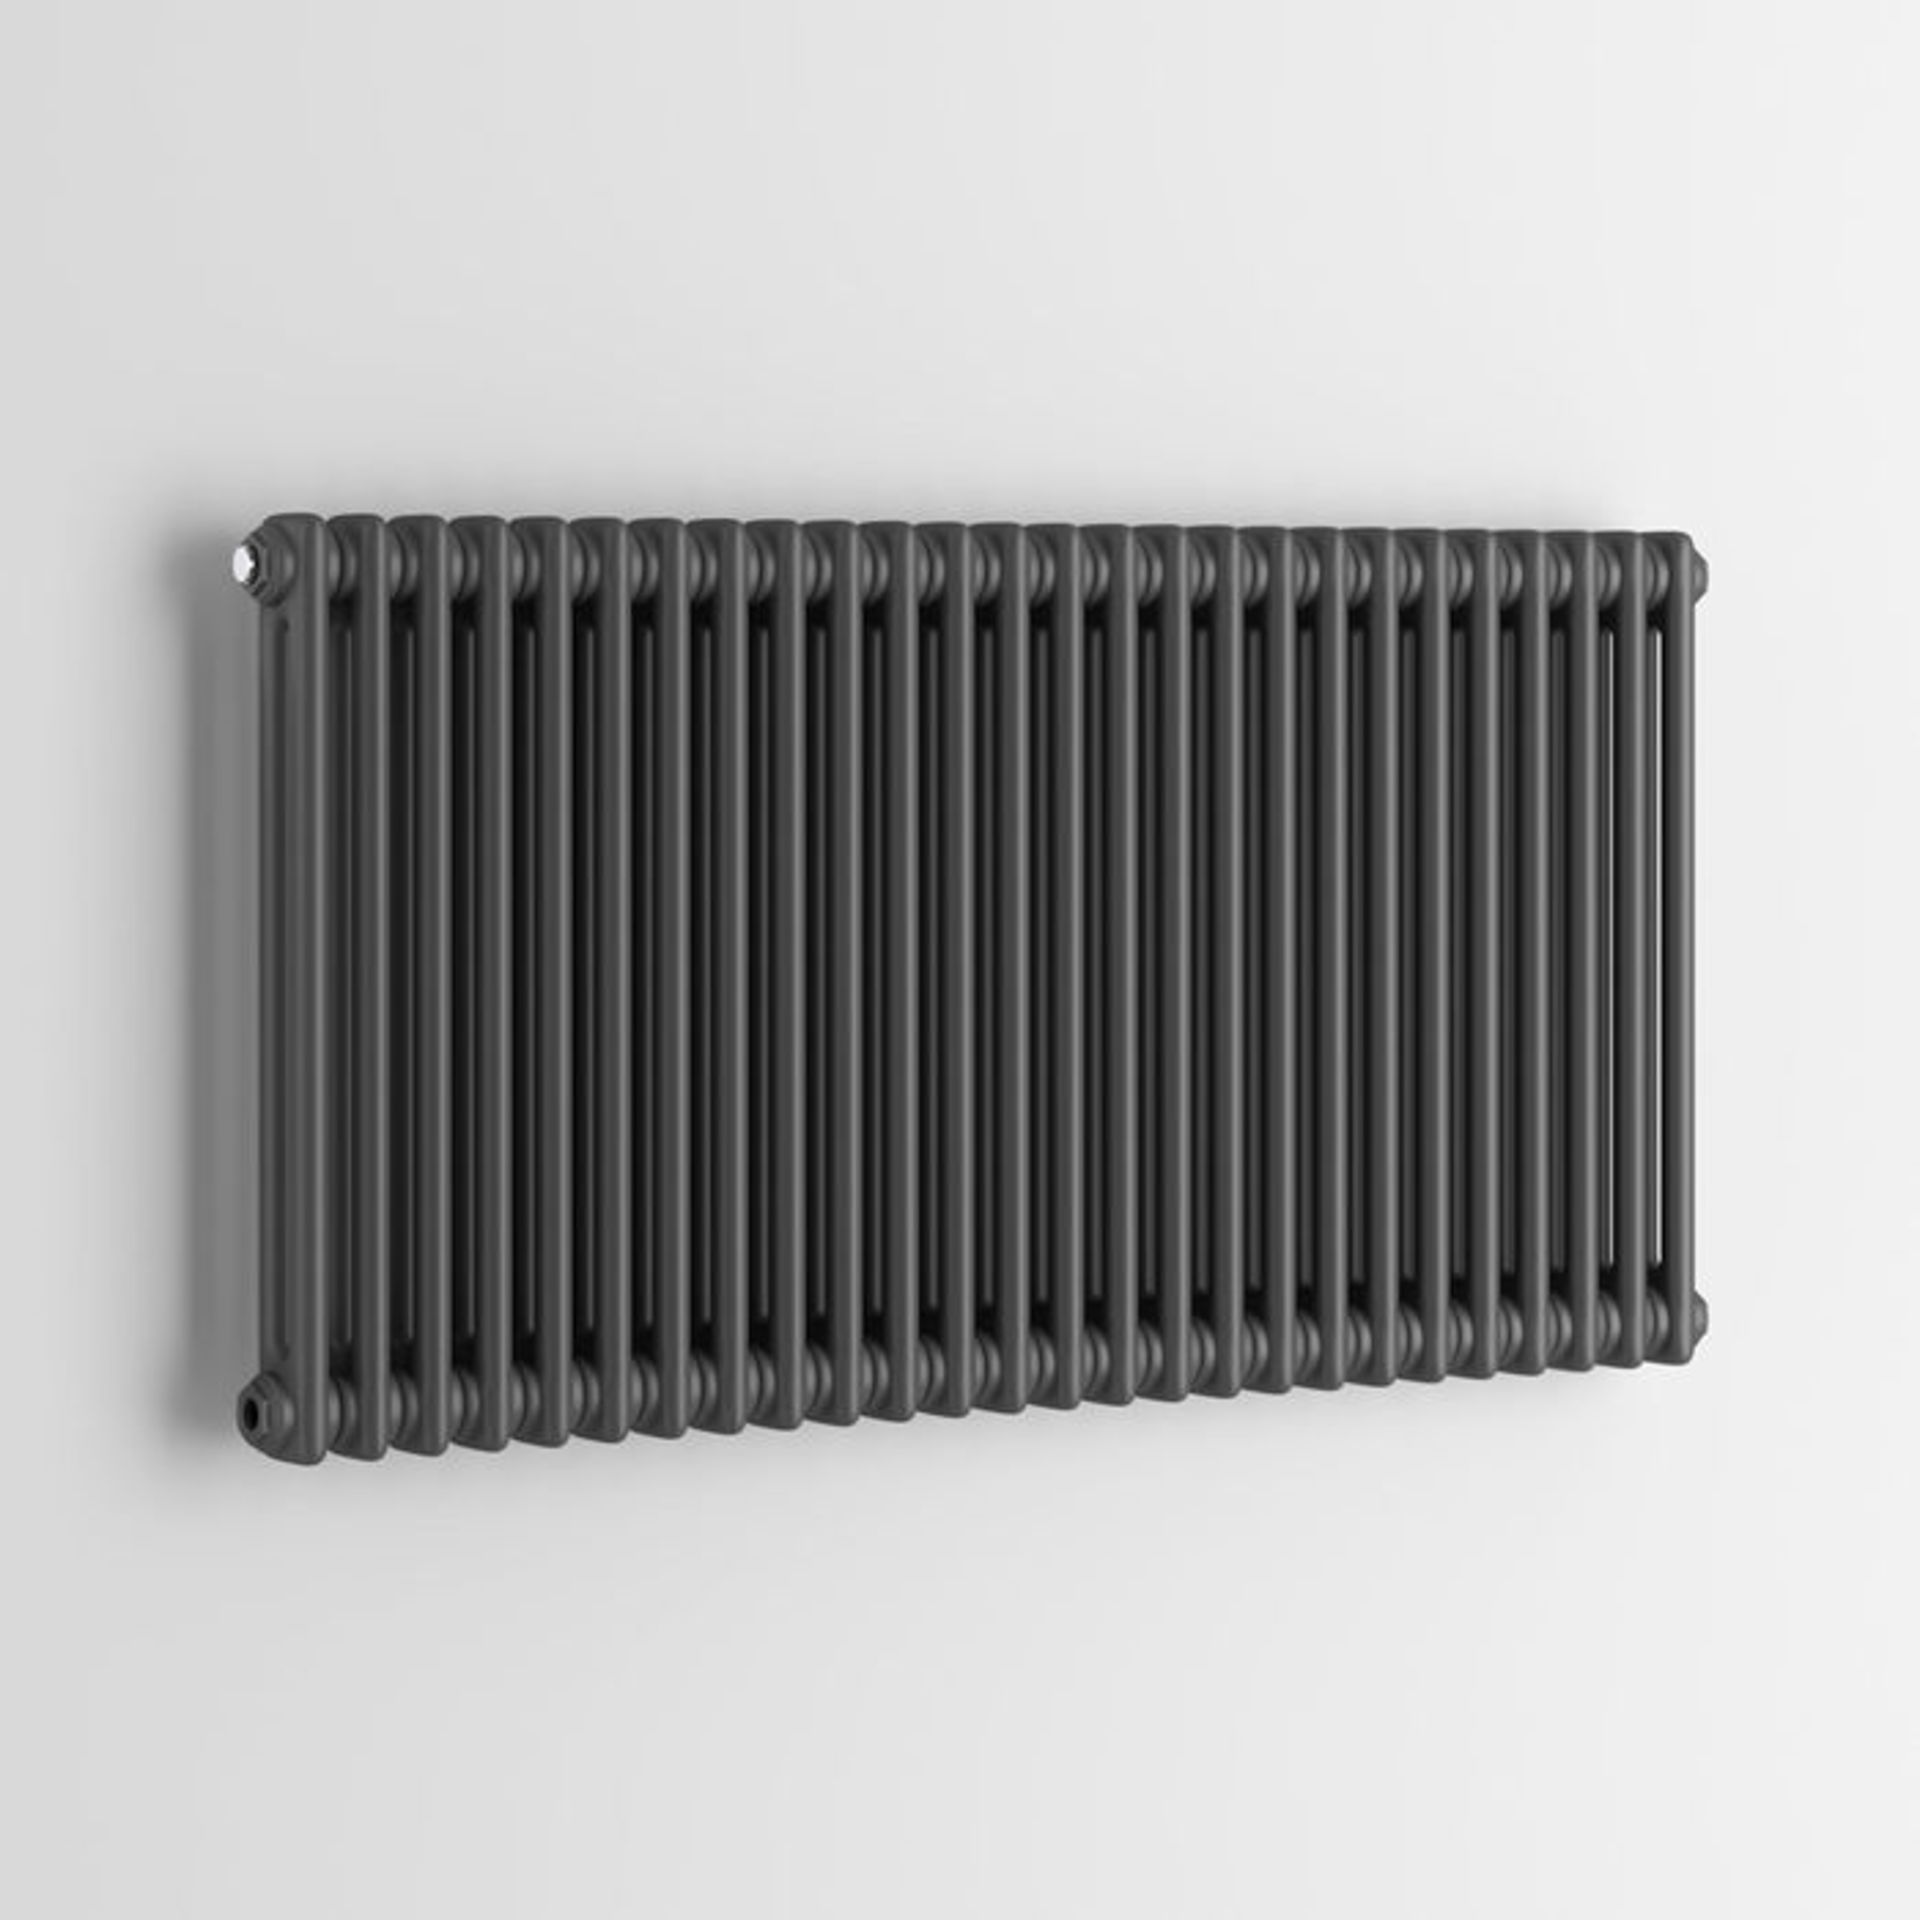 (PO173) 600x1188mm Anthracite Double Panel Horizontal Colosseum Traditional Radiator. RRP £599.99. - Image 3 of 3